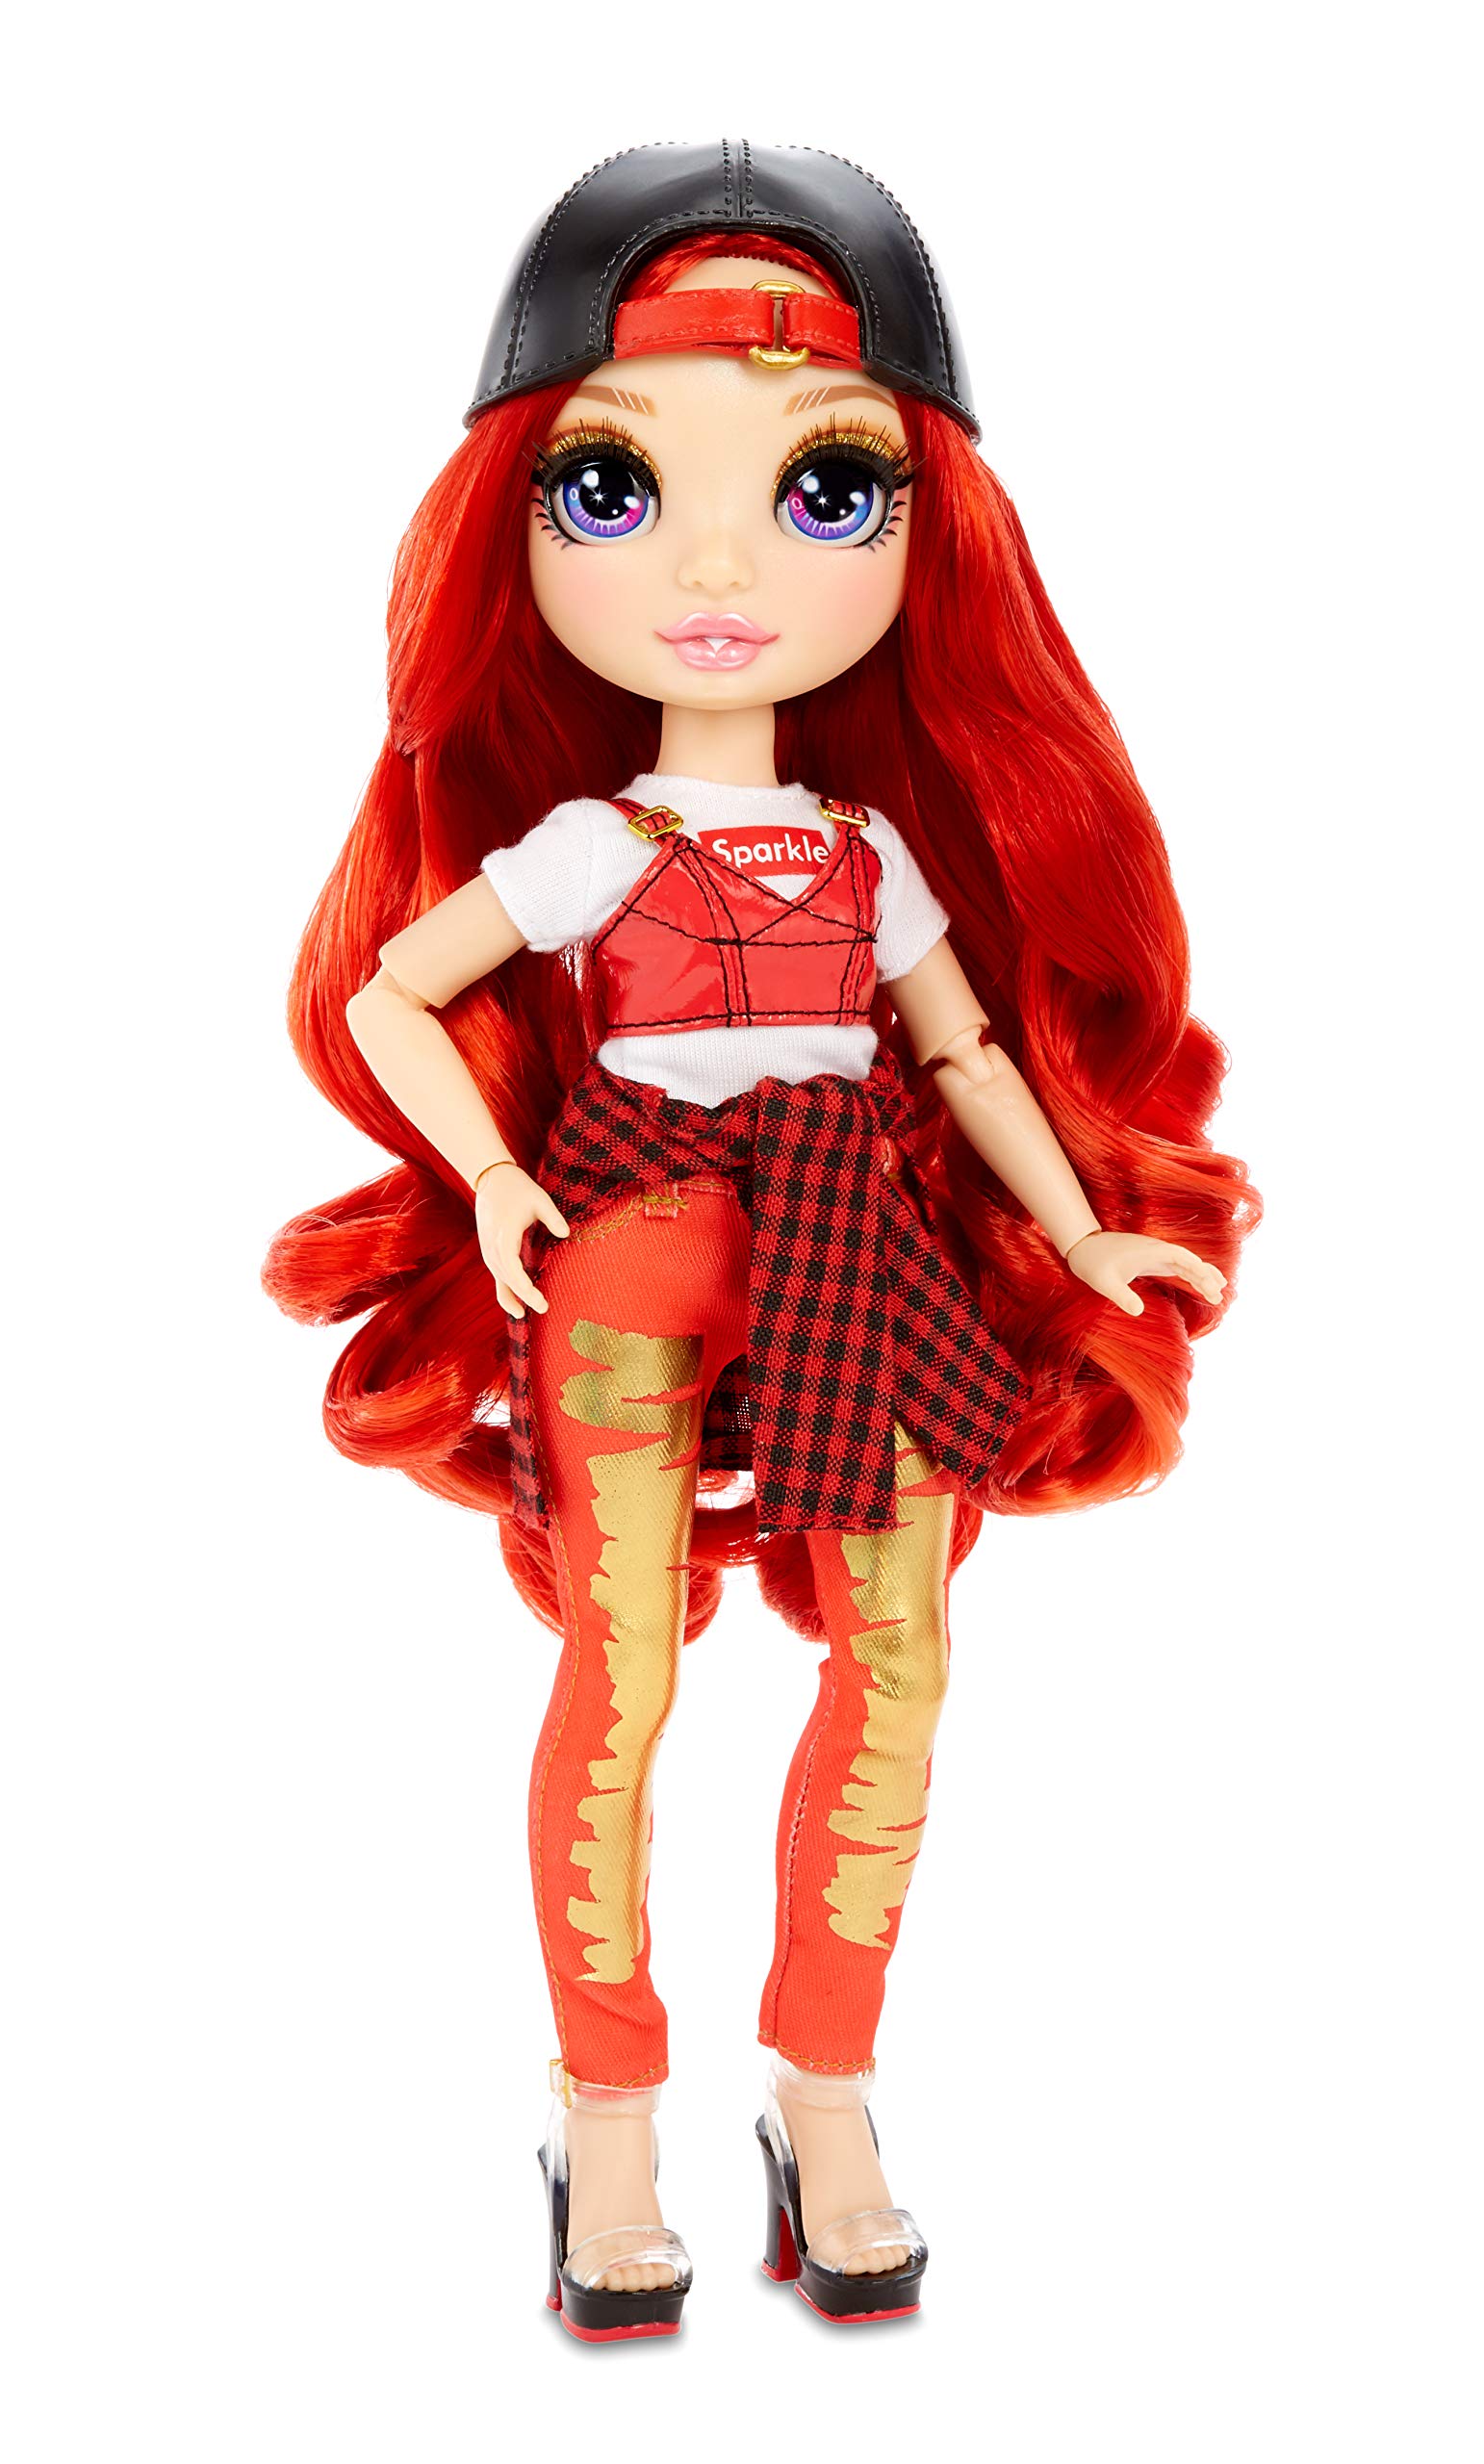 Rainbow High Ruby Anderson - Red Clothes Fashion Doll with 2 Complete Mix & Match Outfits and Accessories, Toys for Kids 6 to 12 Years Old